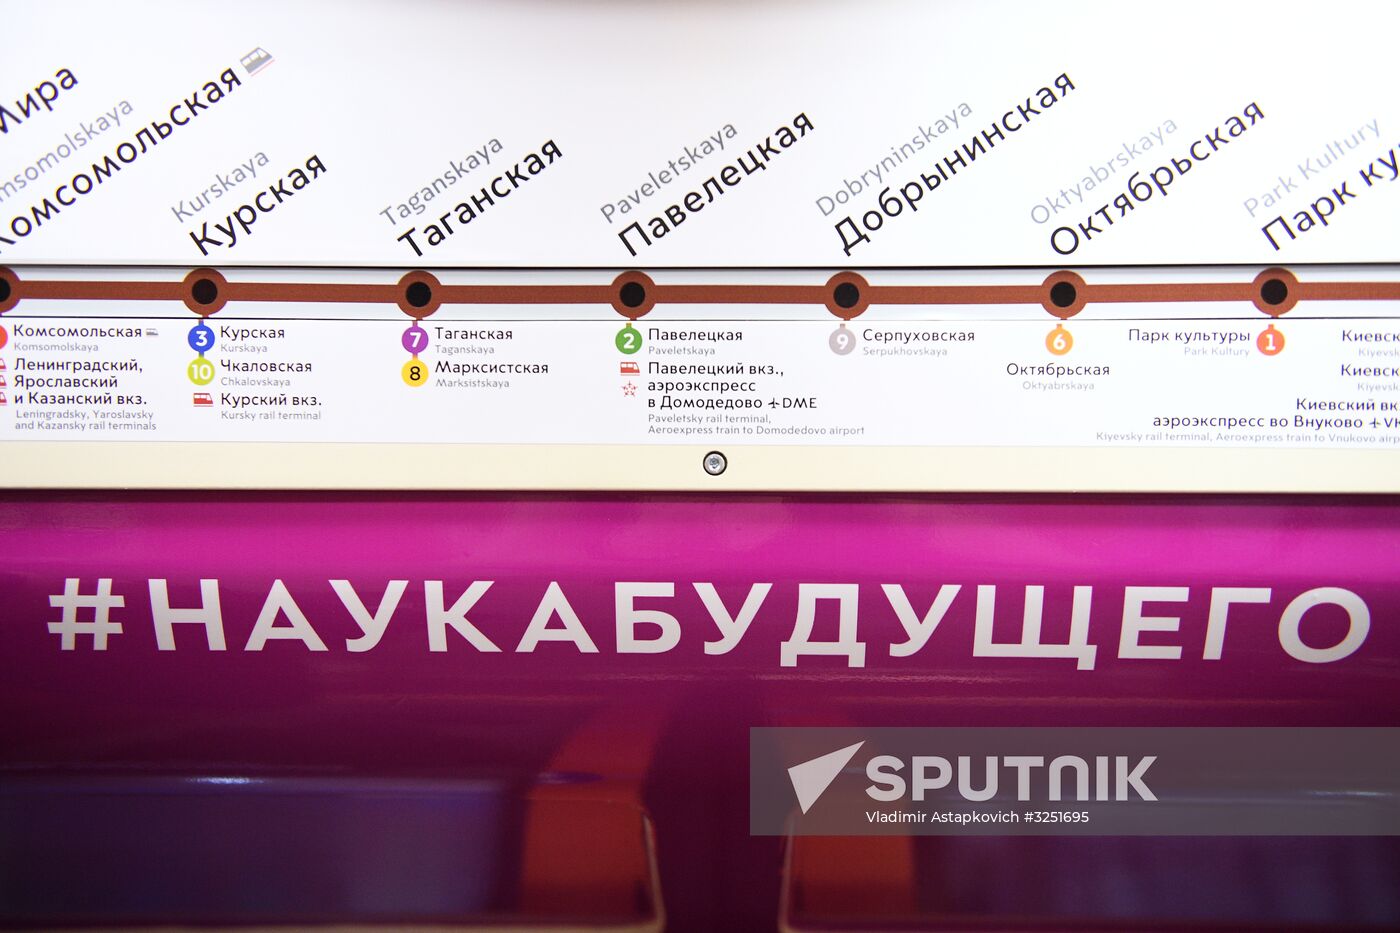 Moscow metro launches Future Science train